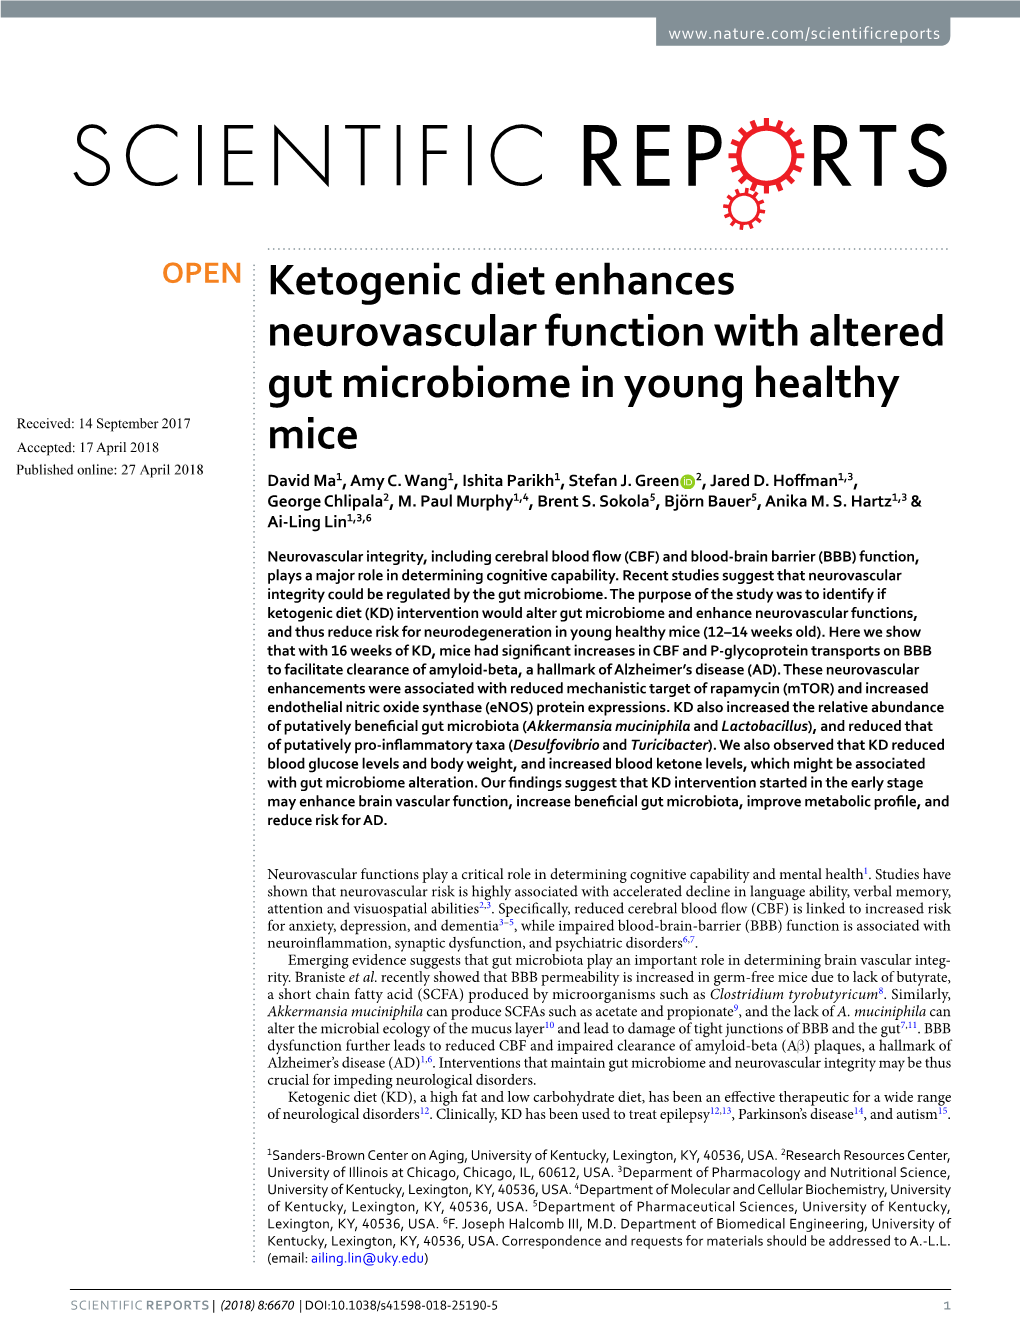 Ketogenic Diet Enhances Neurovascular Function with Altered